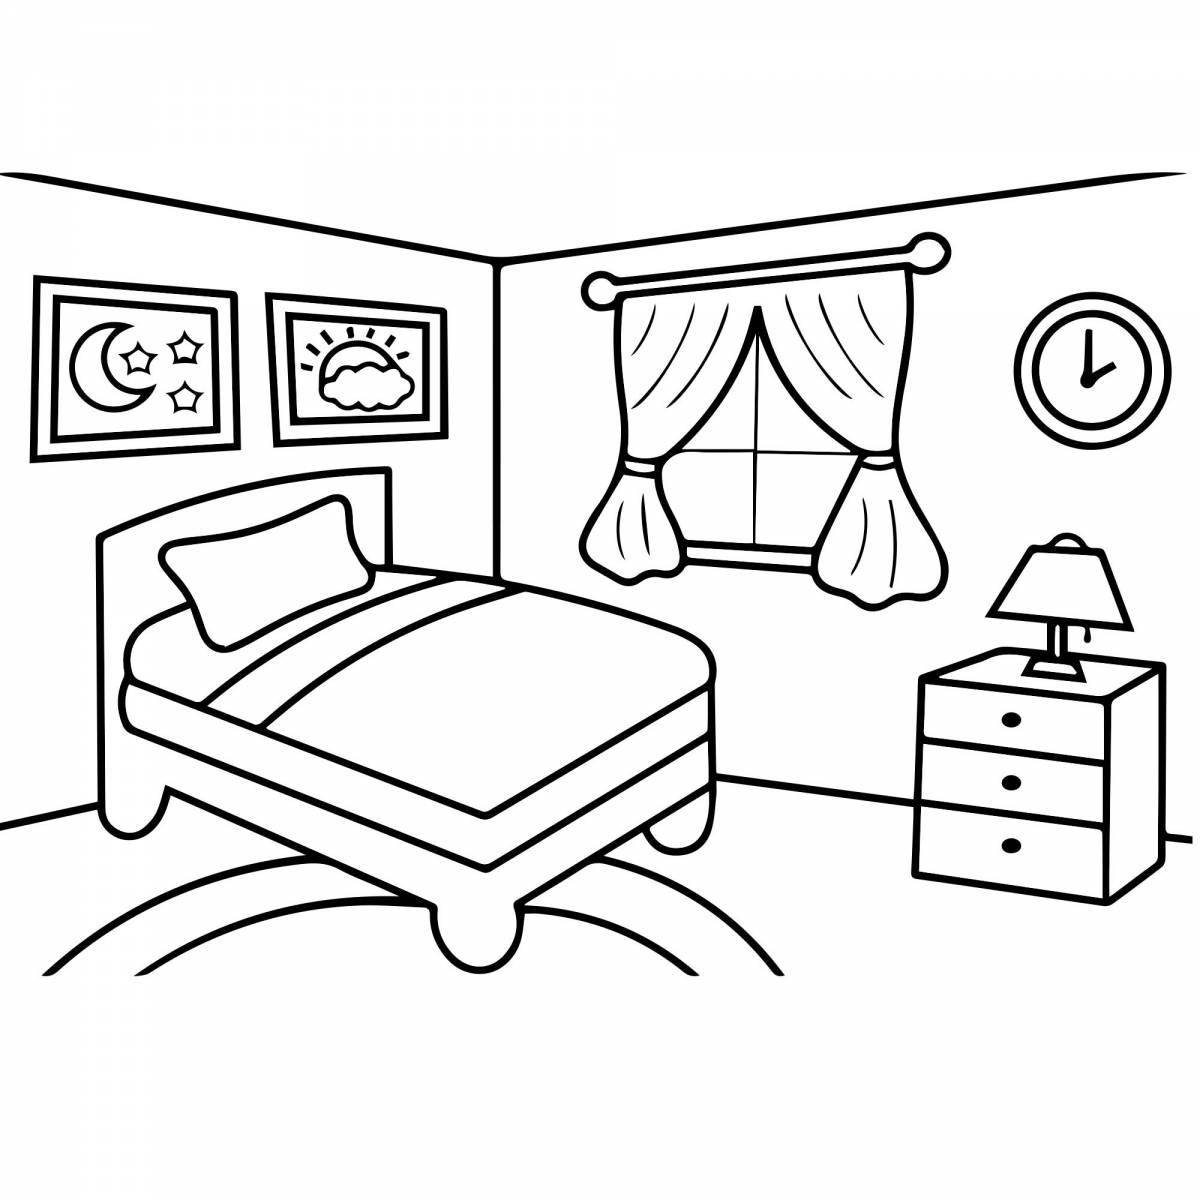 Bedroom grand coloring page